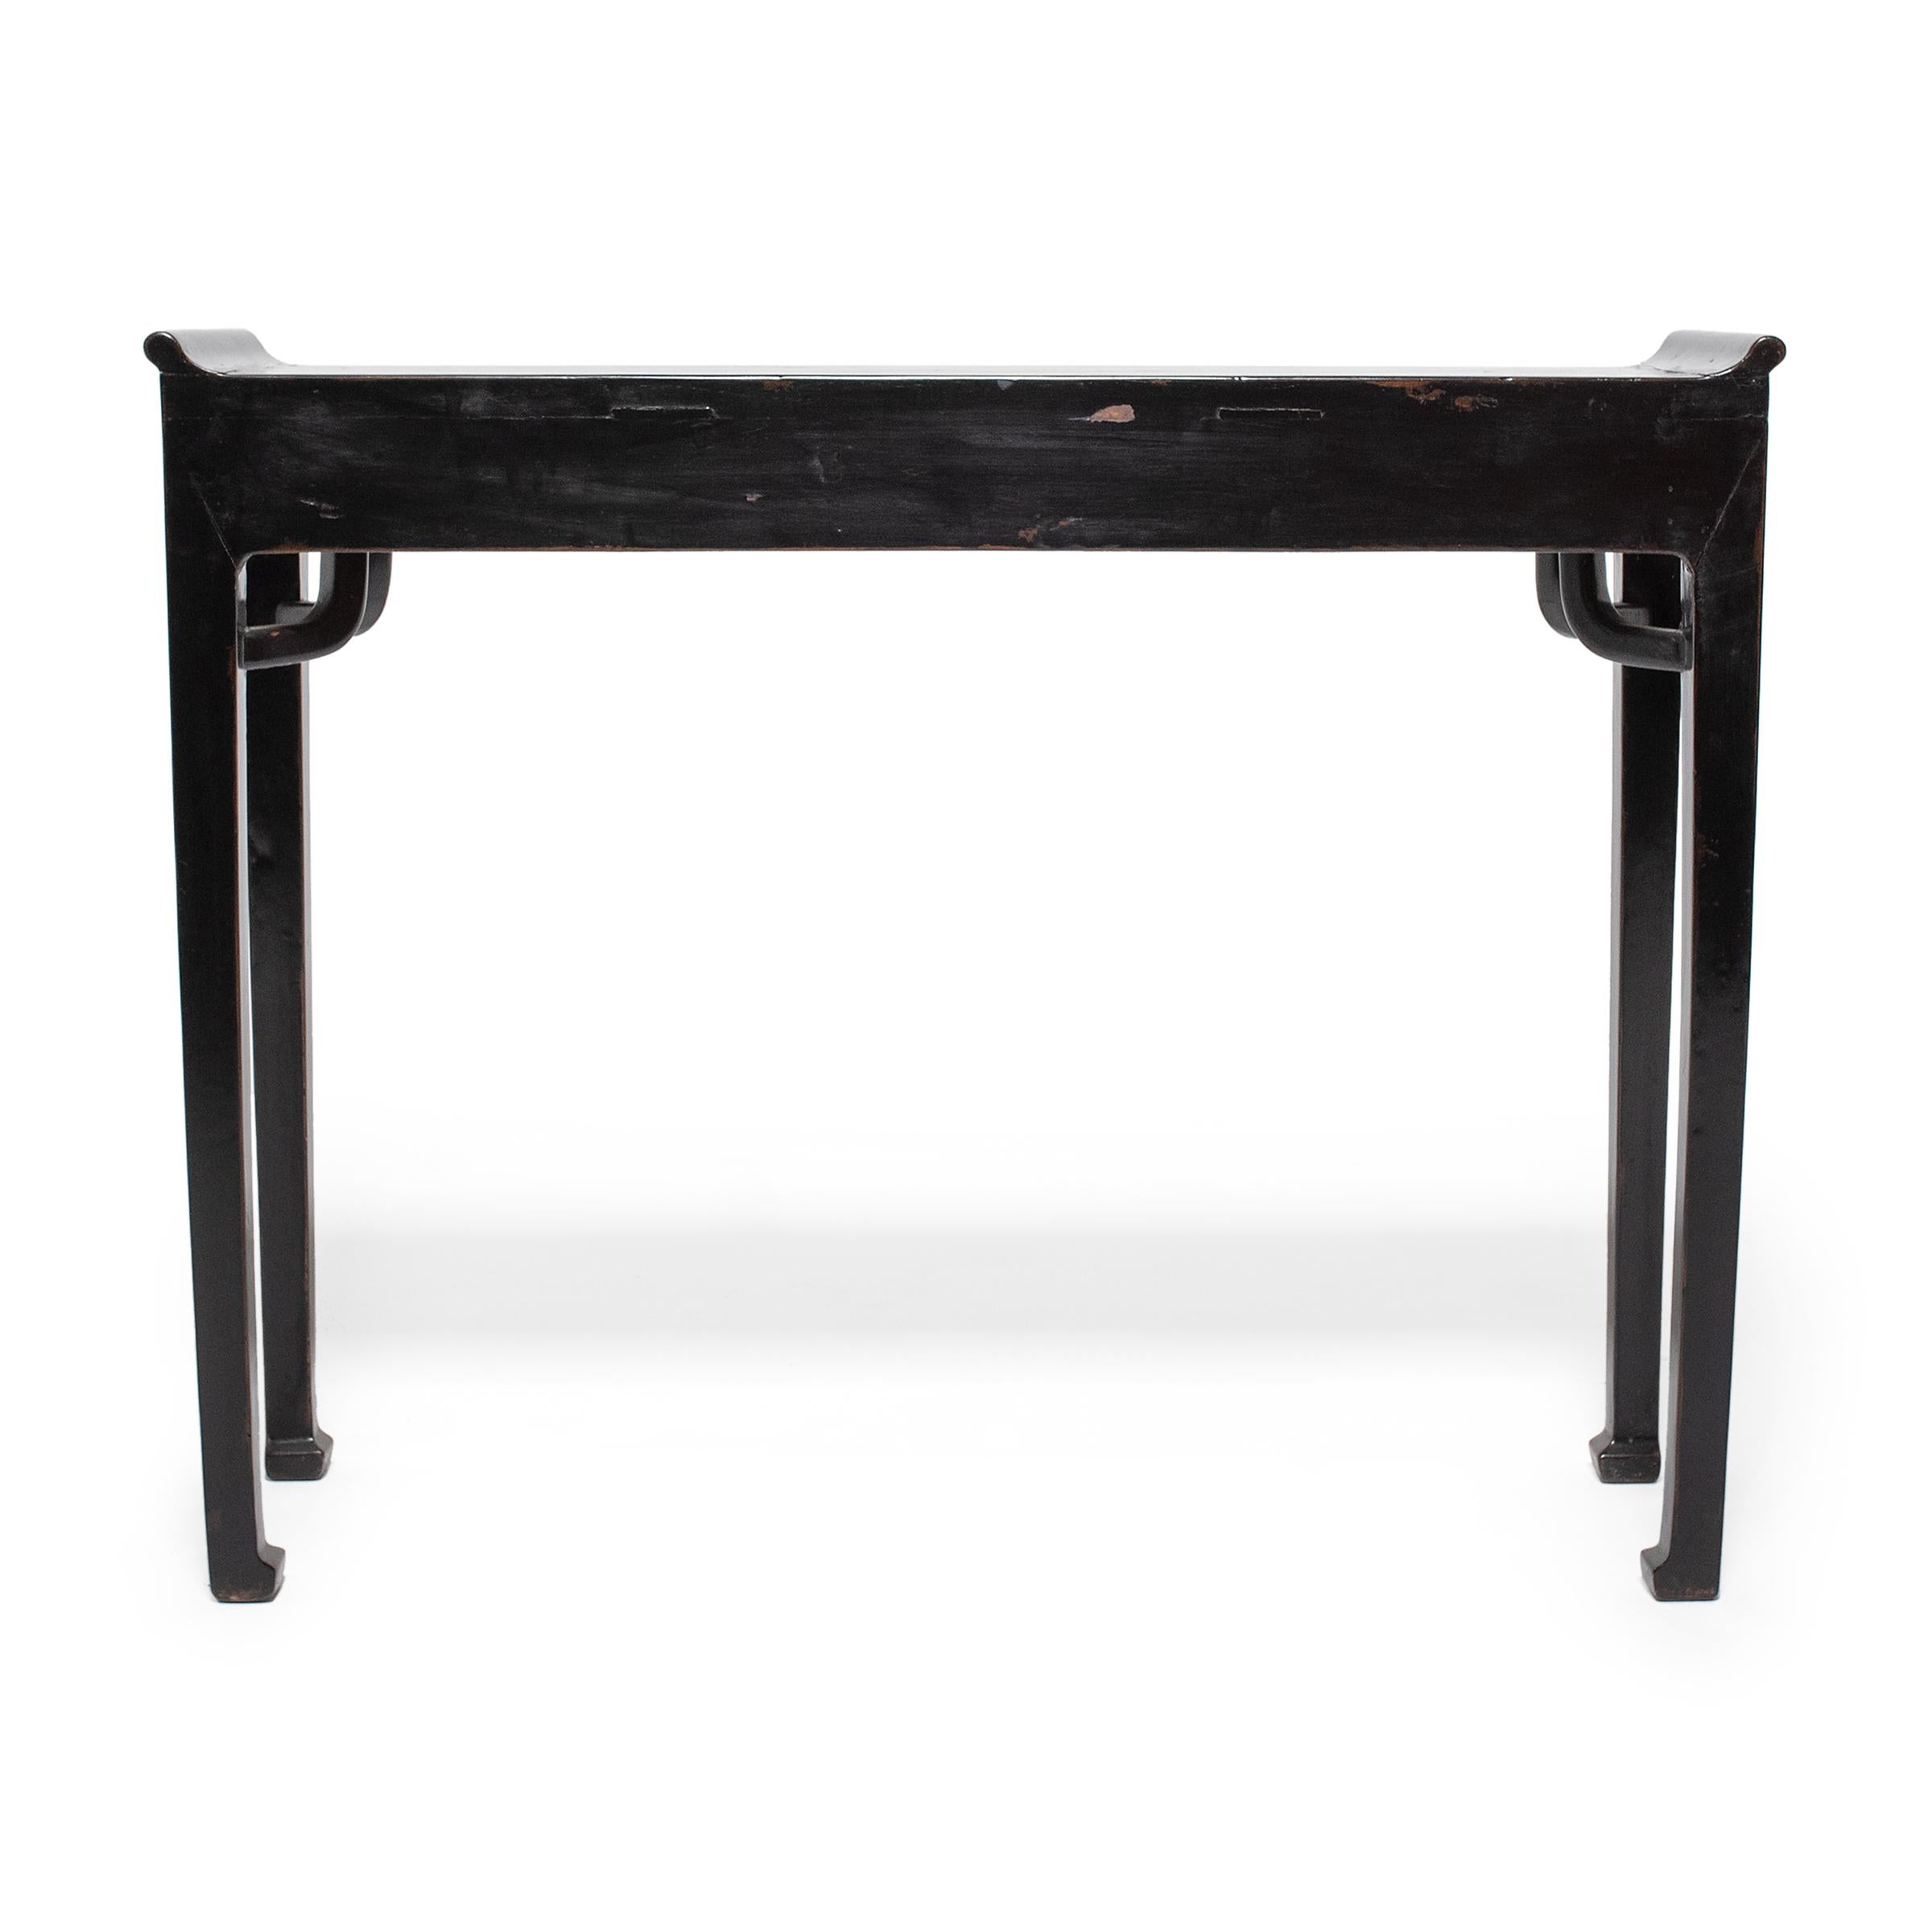 20th Century Chinese Black Lacquer Altar Table with Hidden Drawers, c. 1900